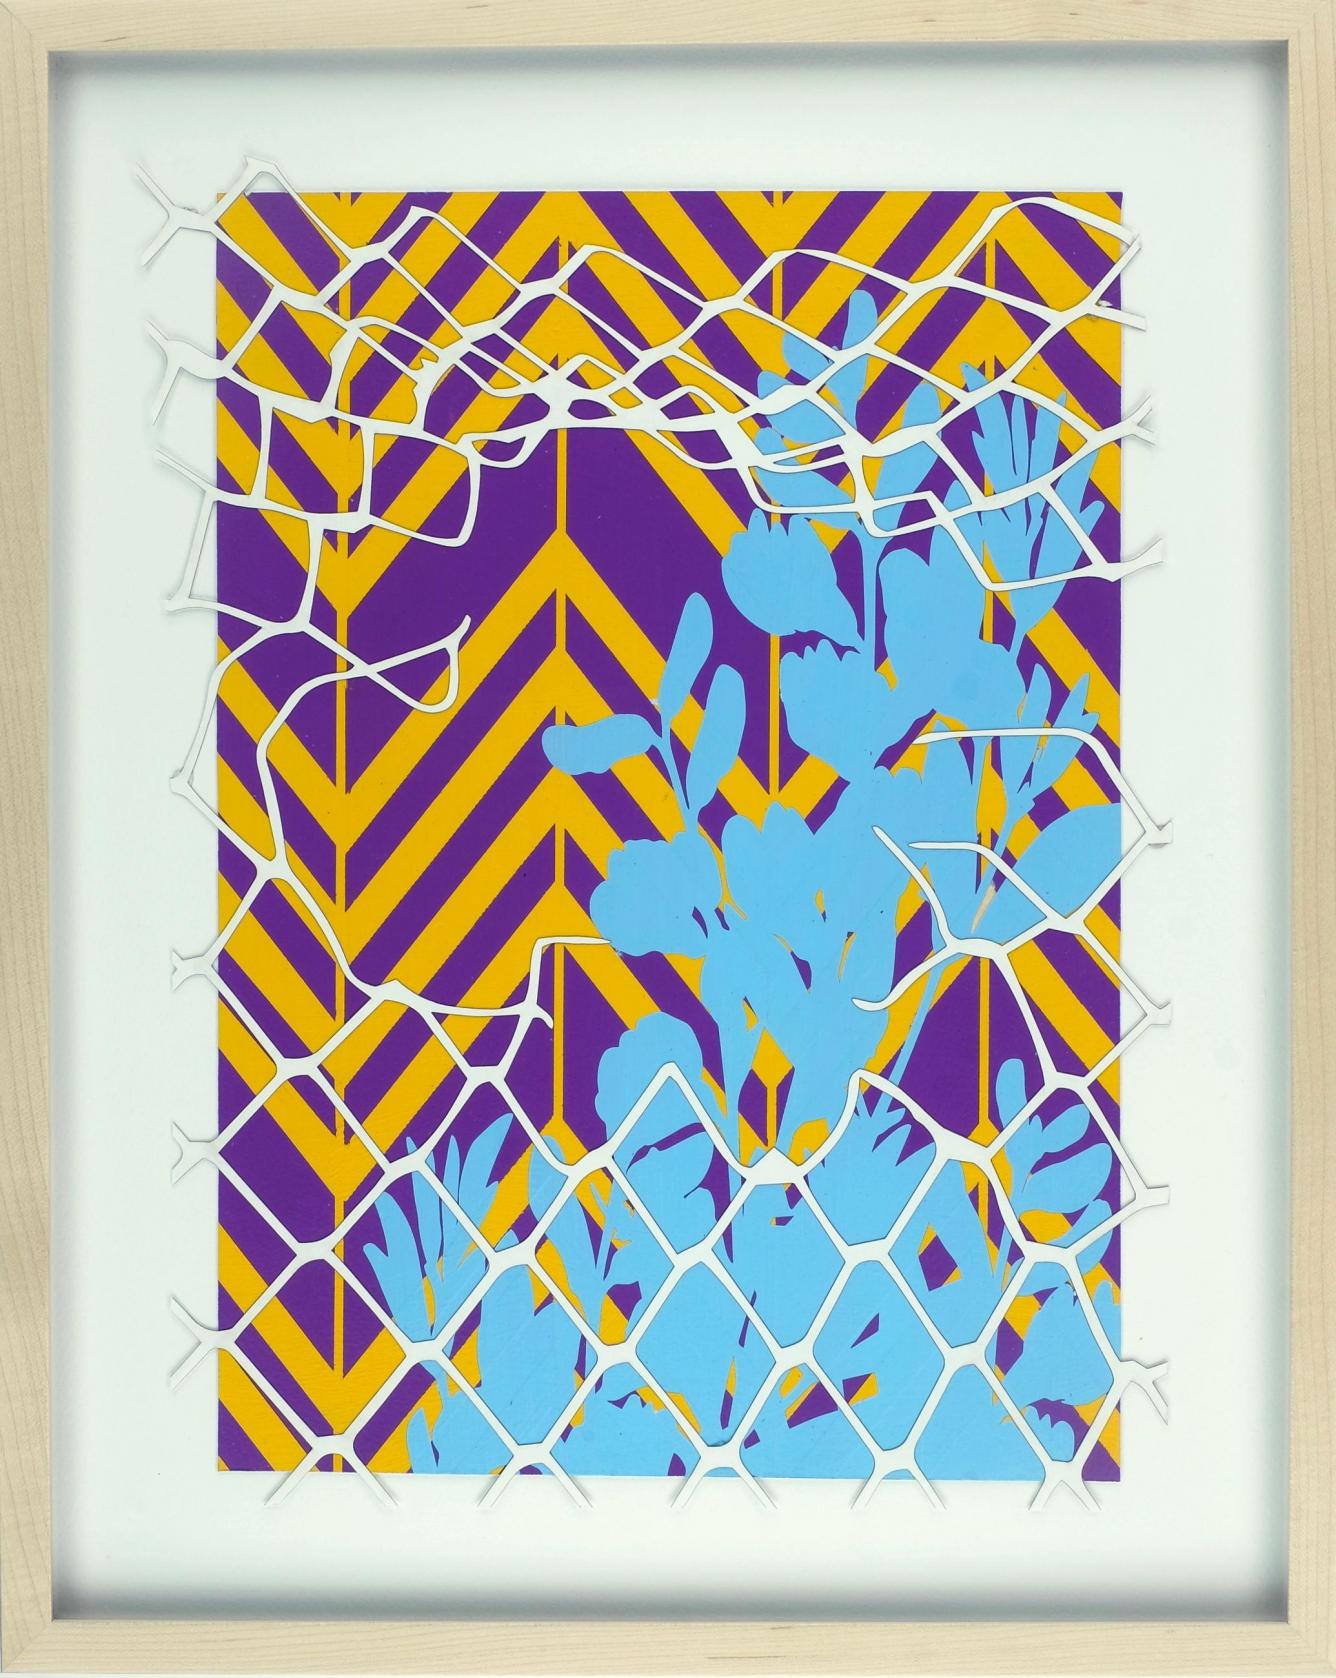 Fronterra No. 2. A psychedelic artwork depicting skyblue flowers against a yellow and purple zig zag background. A depiction of a white chainlink fence is torn open, almost as if we are looking through the fence.